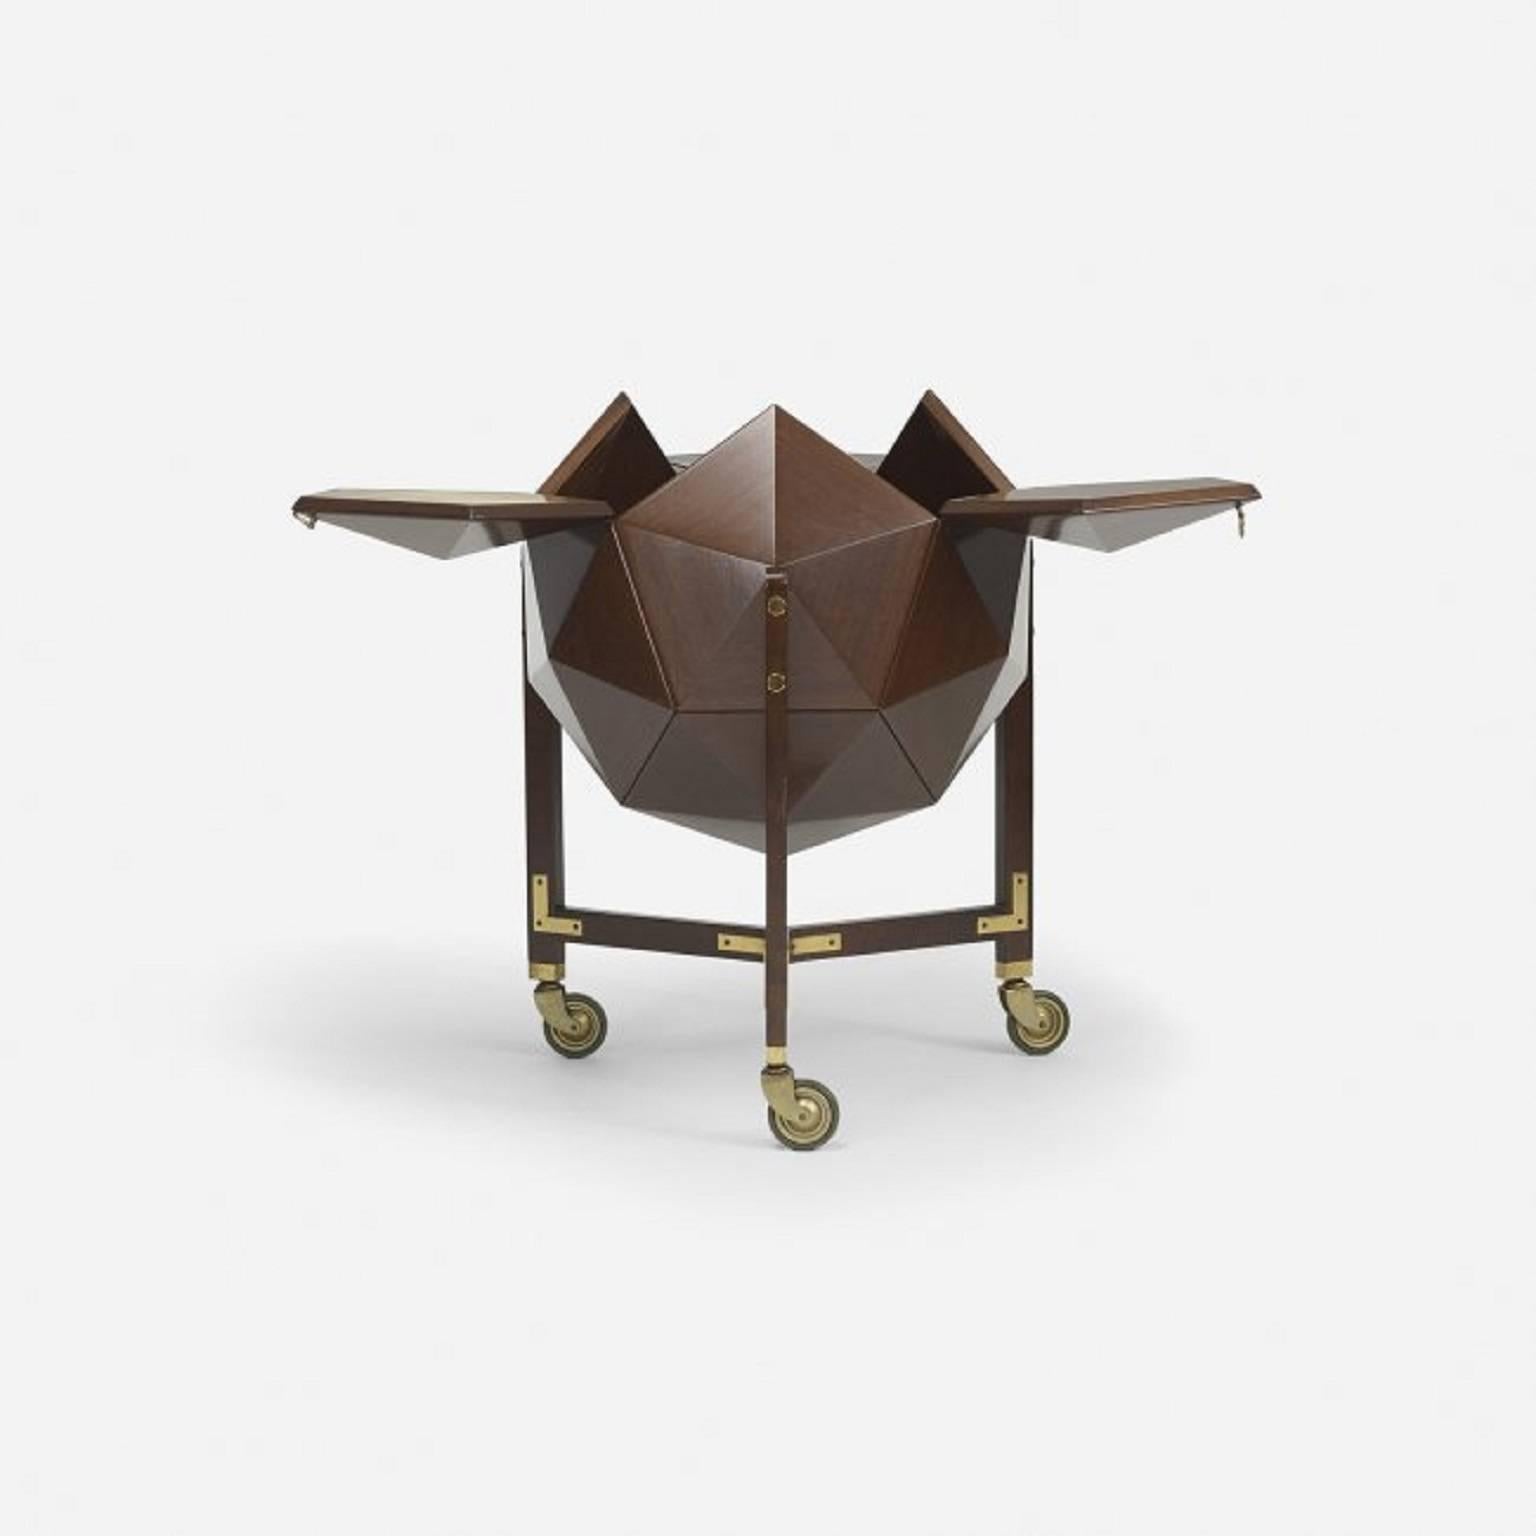 Polyhedron-shaped mahogany bar attributed to Ico & Luisa Parisi.

Three doors with leather covering on the inside open to revel a storage for bottles and barware.
 
Brass, brass-plated steel, leather and rubber fittings.